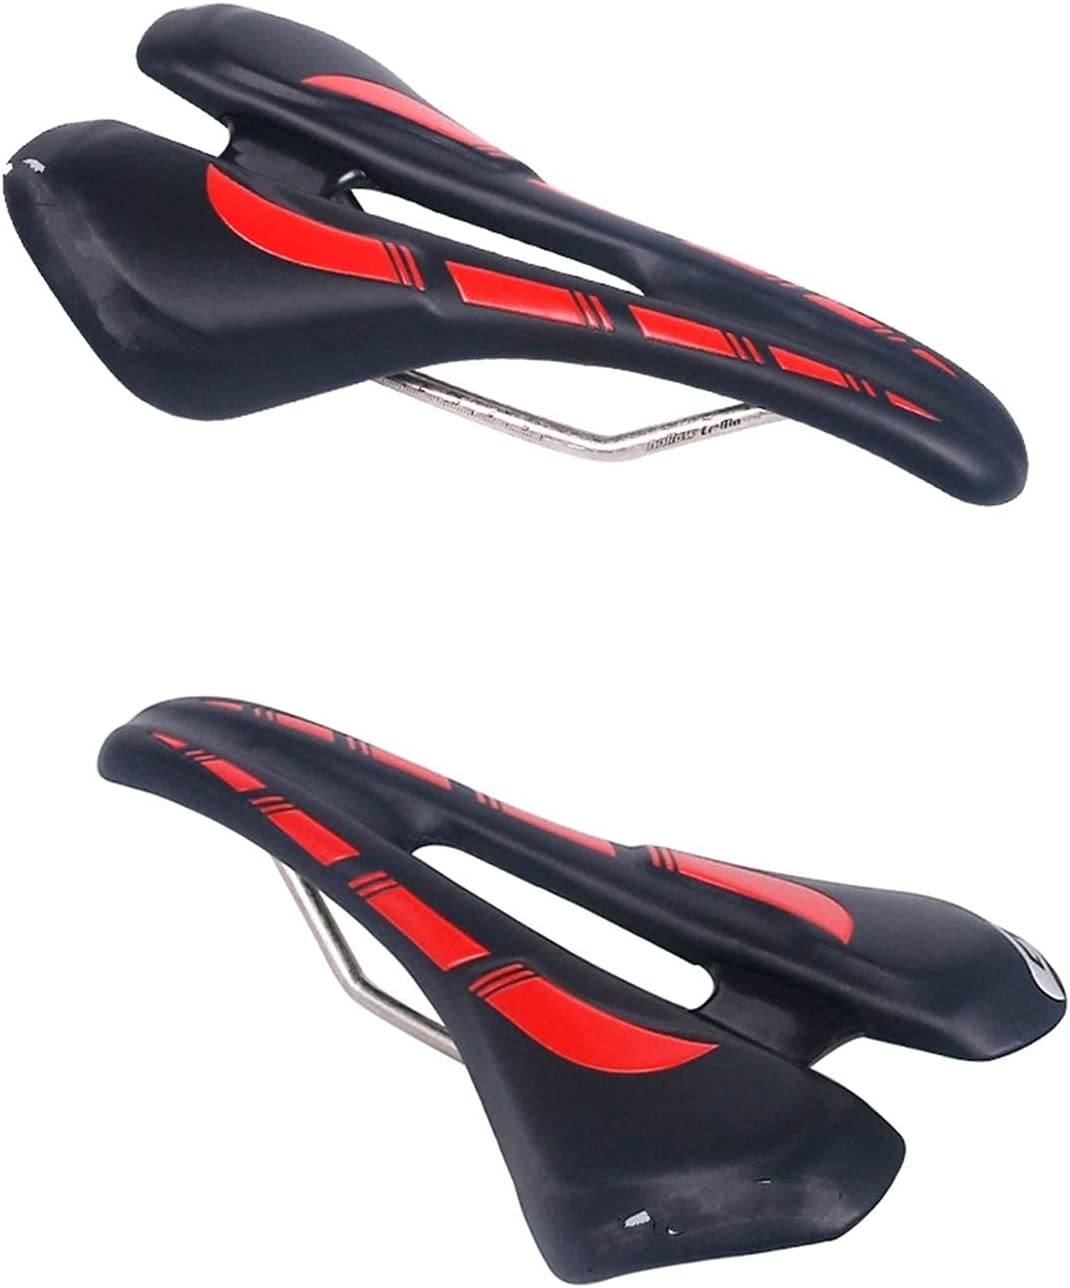 A mountain bike saddle is usually covered with microfiber.